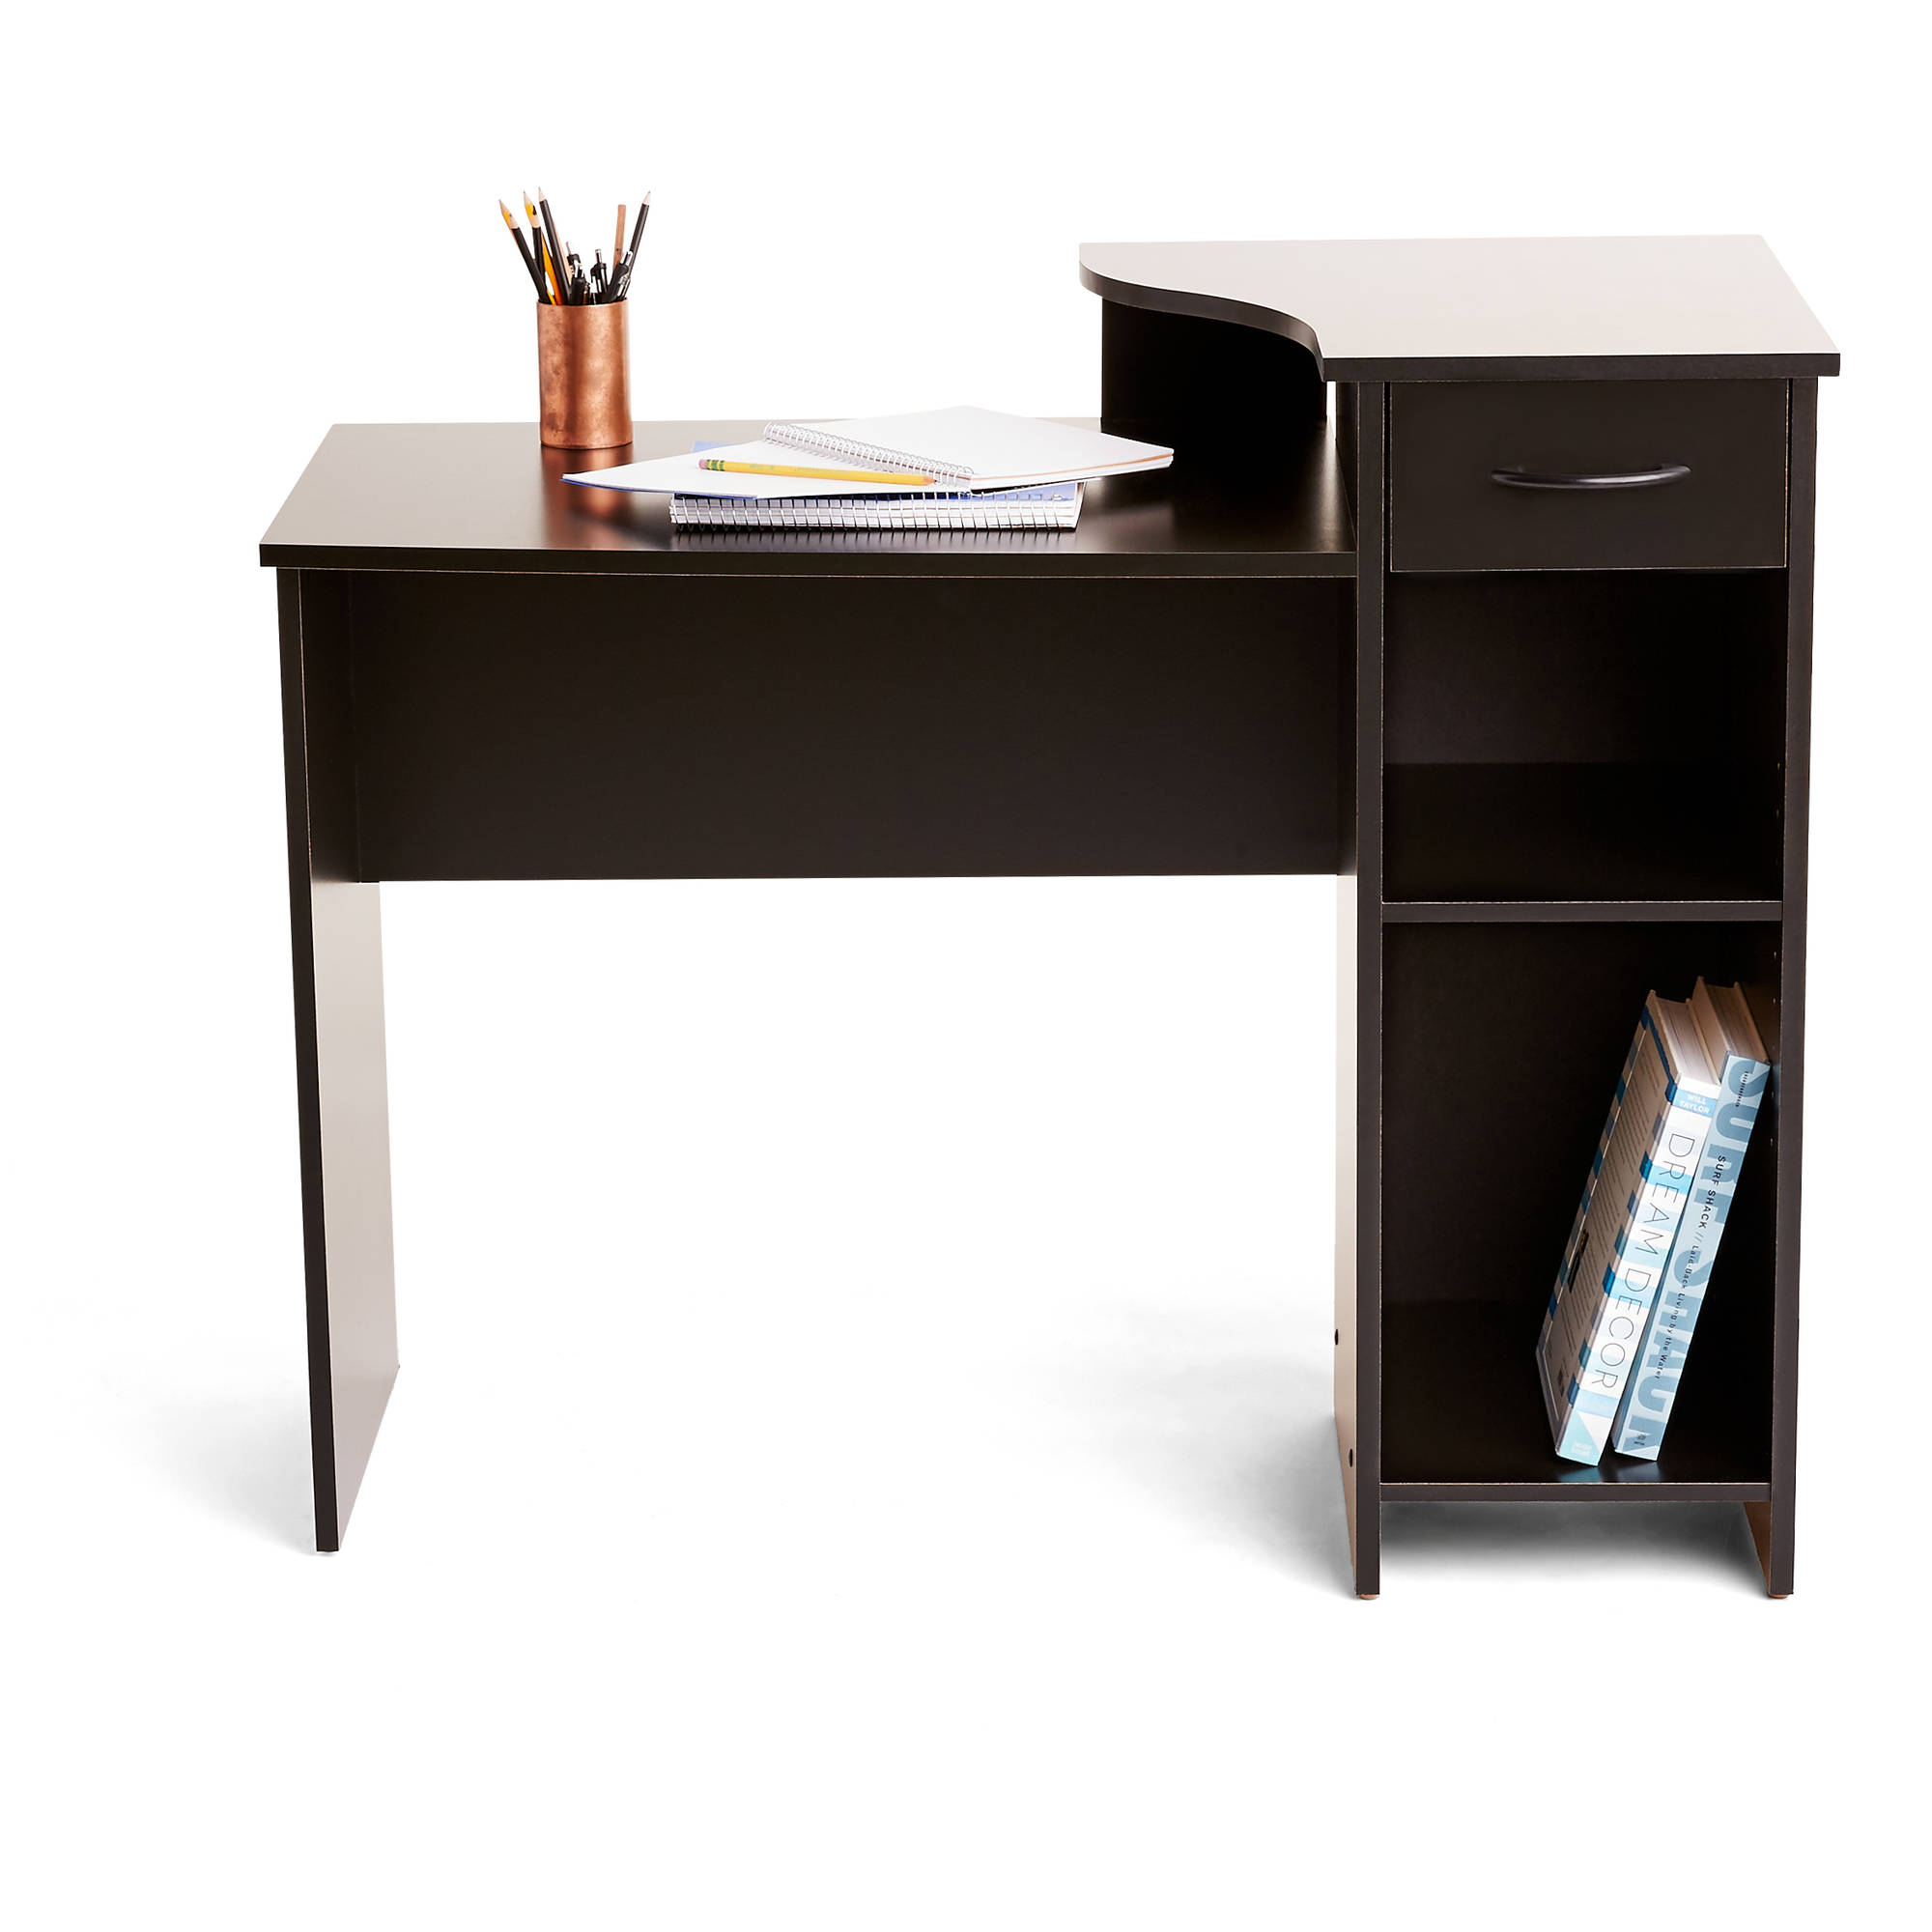 Mainstays Student Desk with Easy-glide Drawer, Blackwood Finish - image 2 of 6